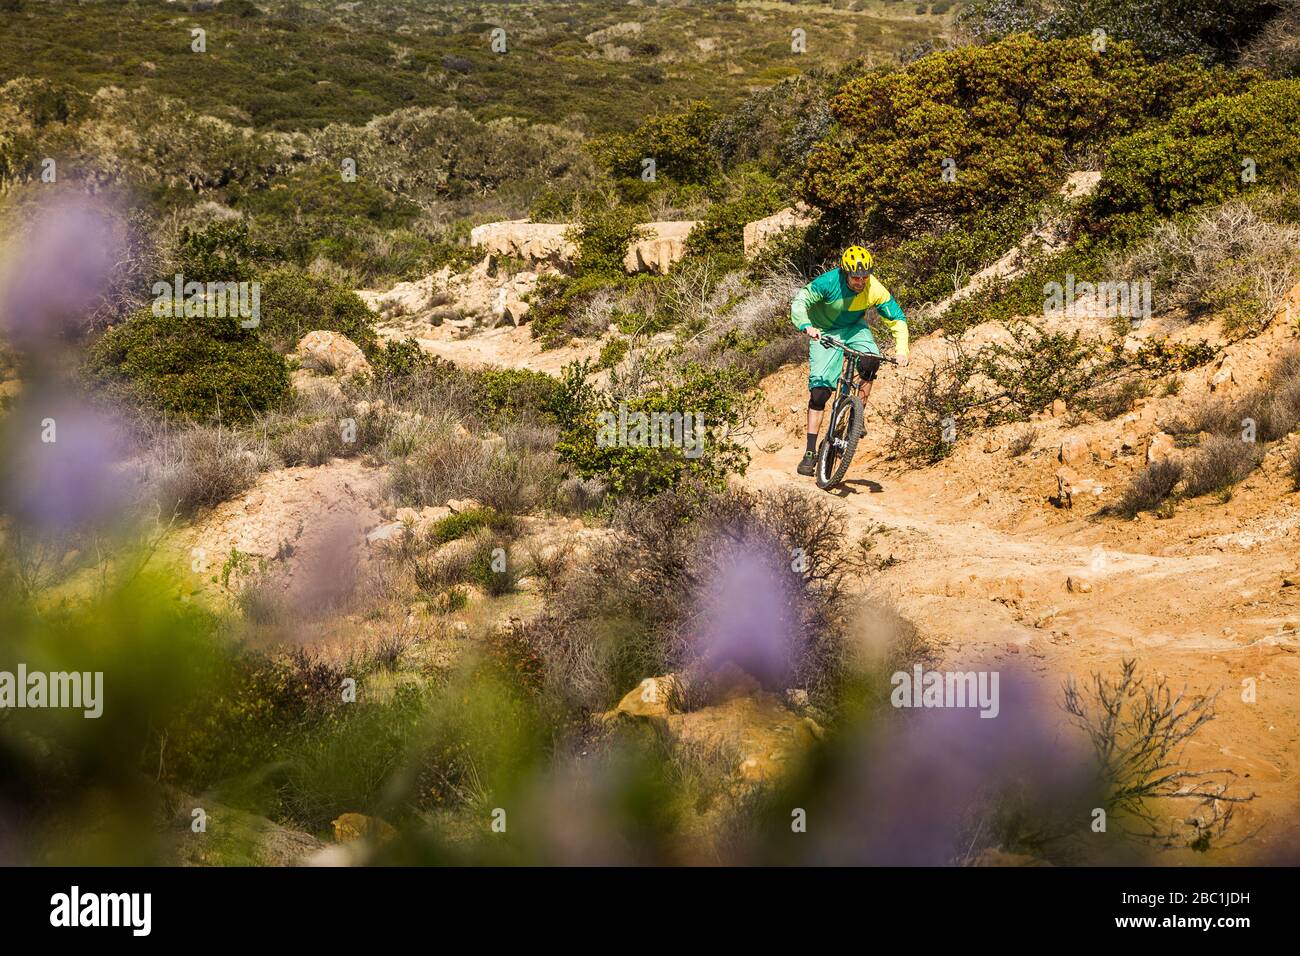 Man riding up dirth path on mountainbike in Fort Ord National Monument Park, Monterey, California, USA Stock Photo